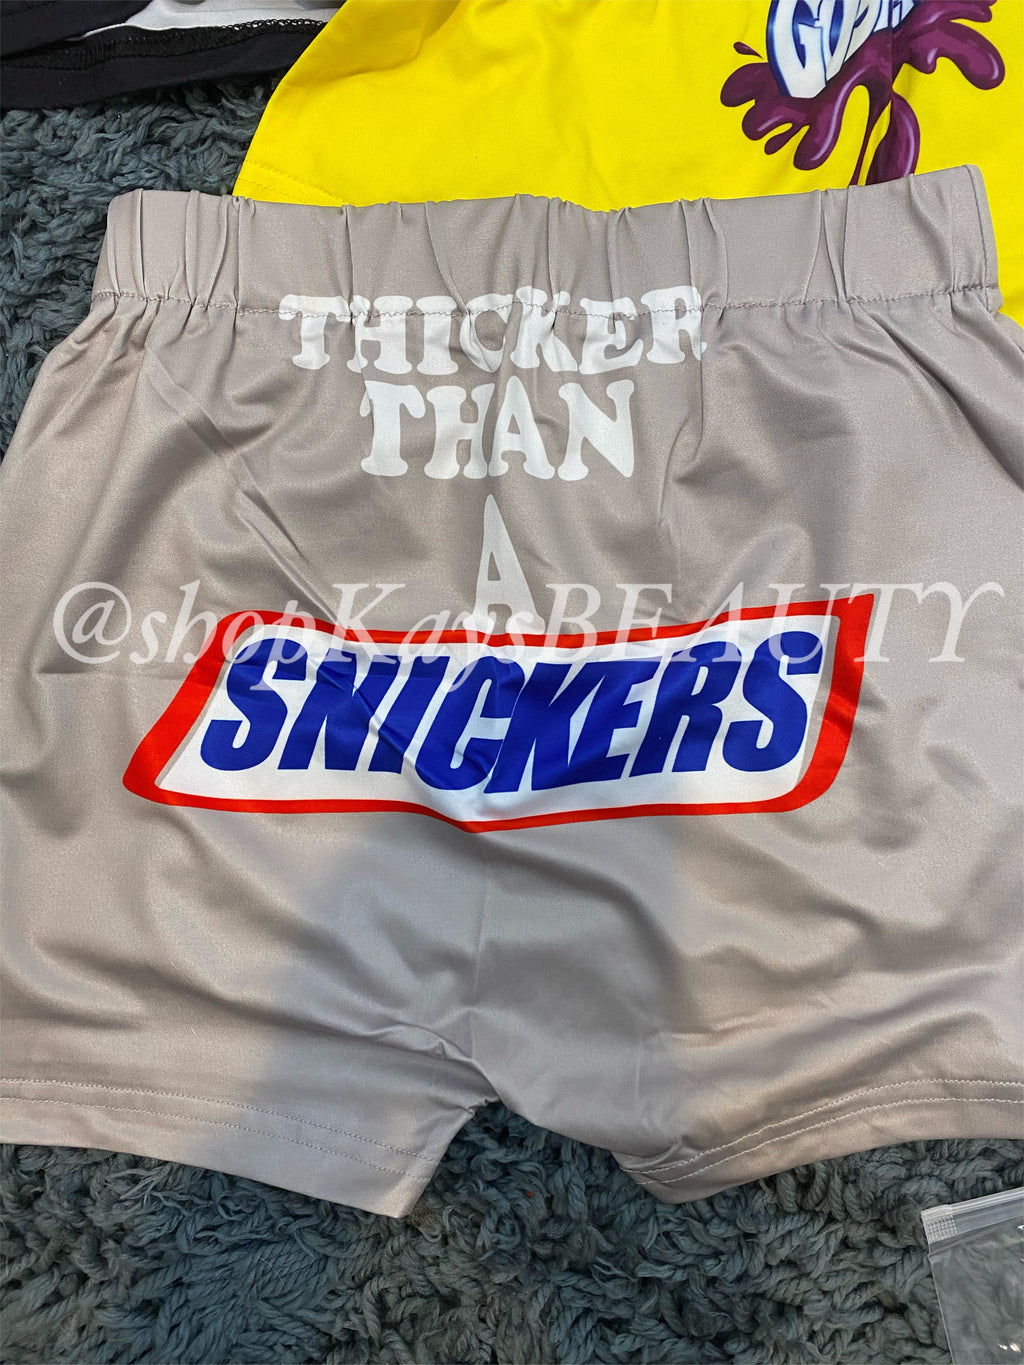 "Thicker Than a Snickers" Set